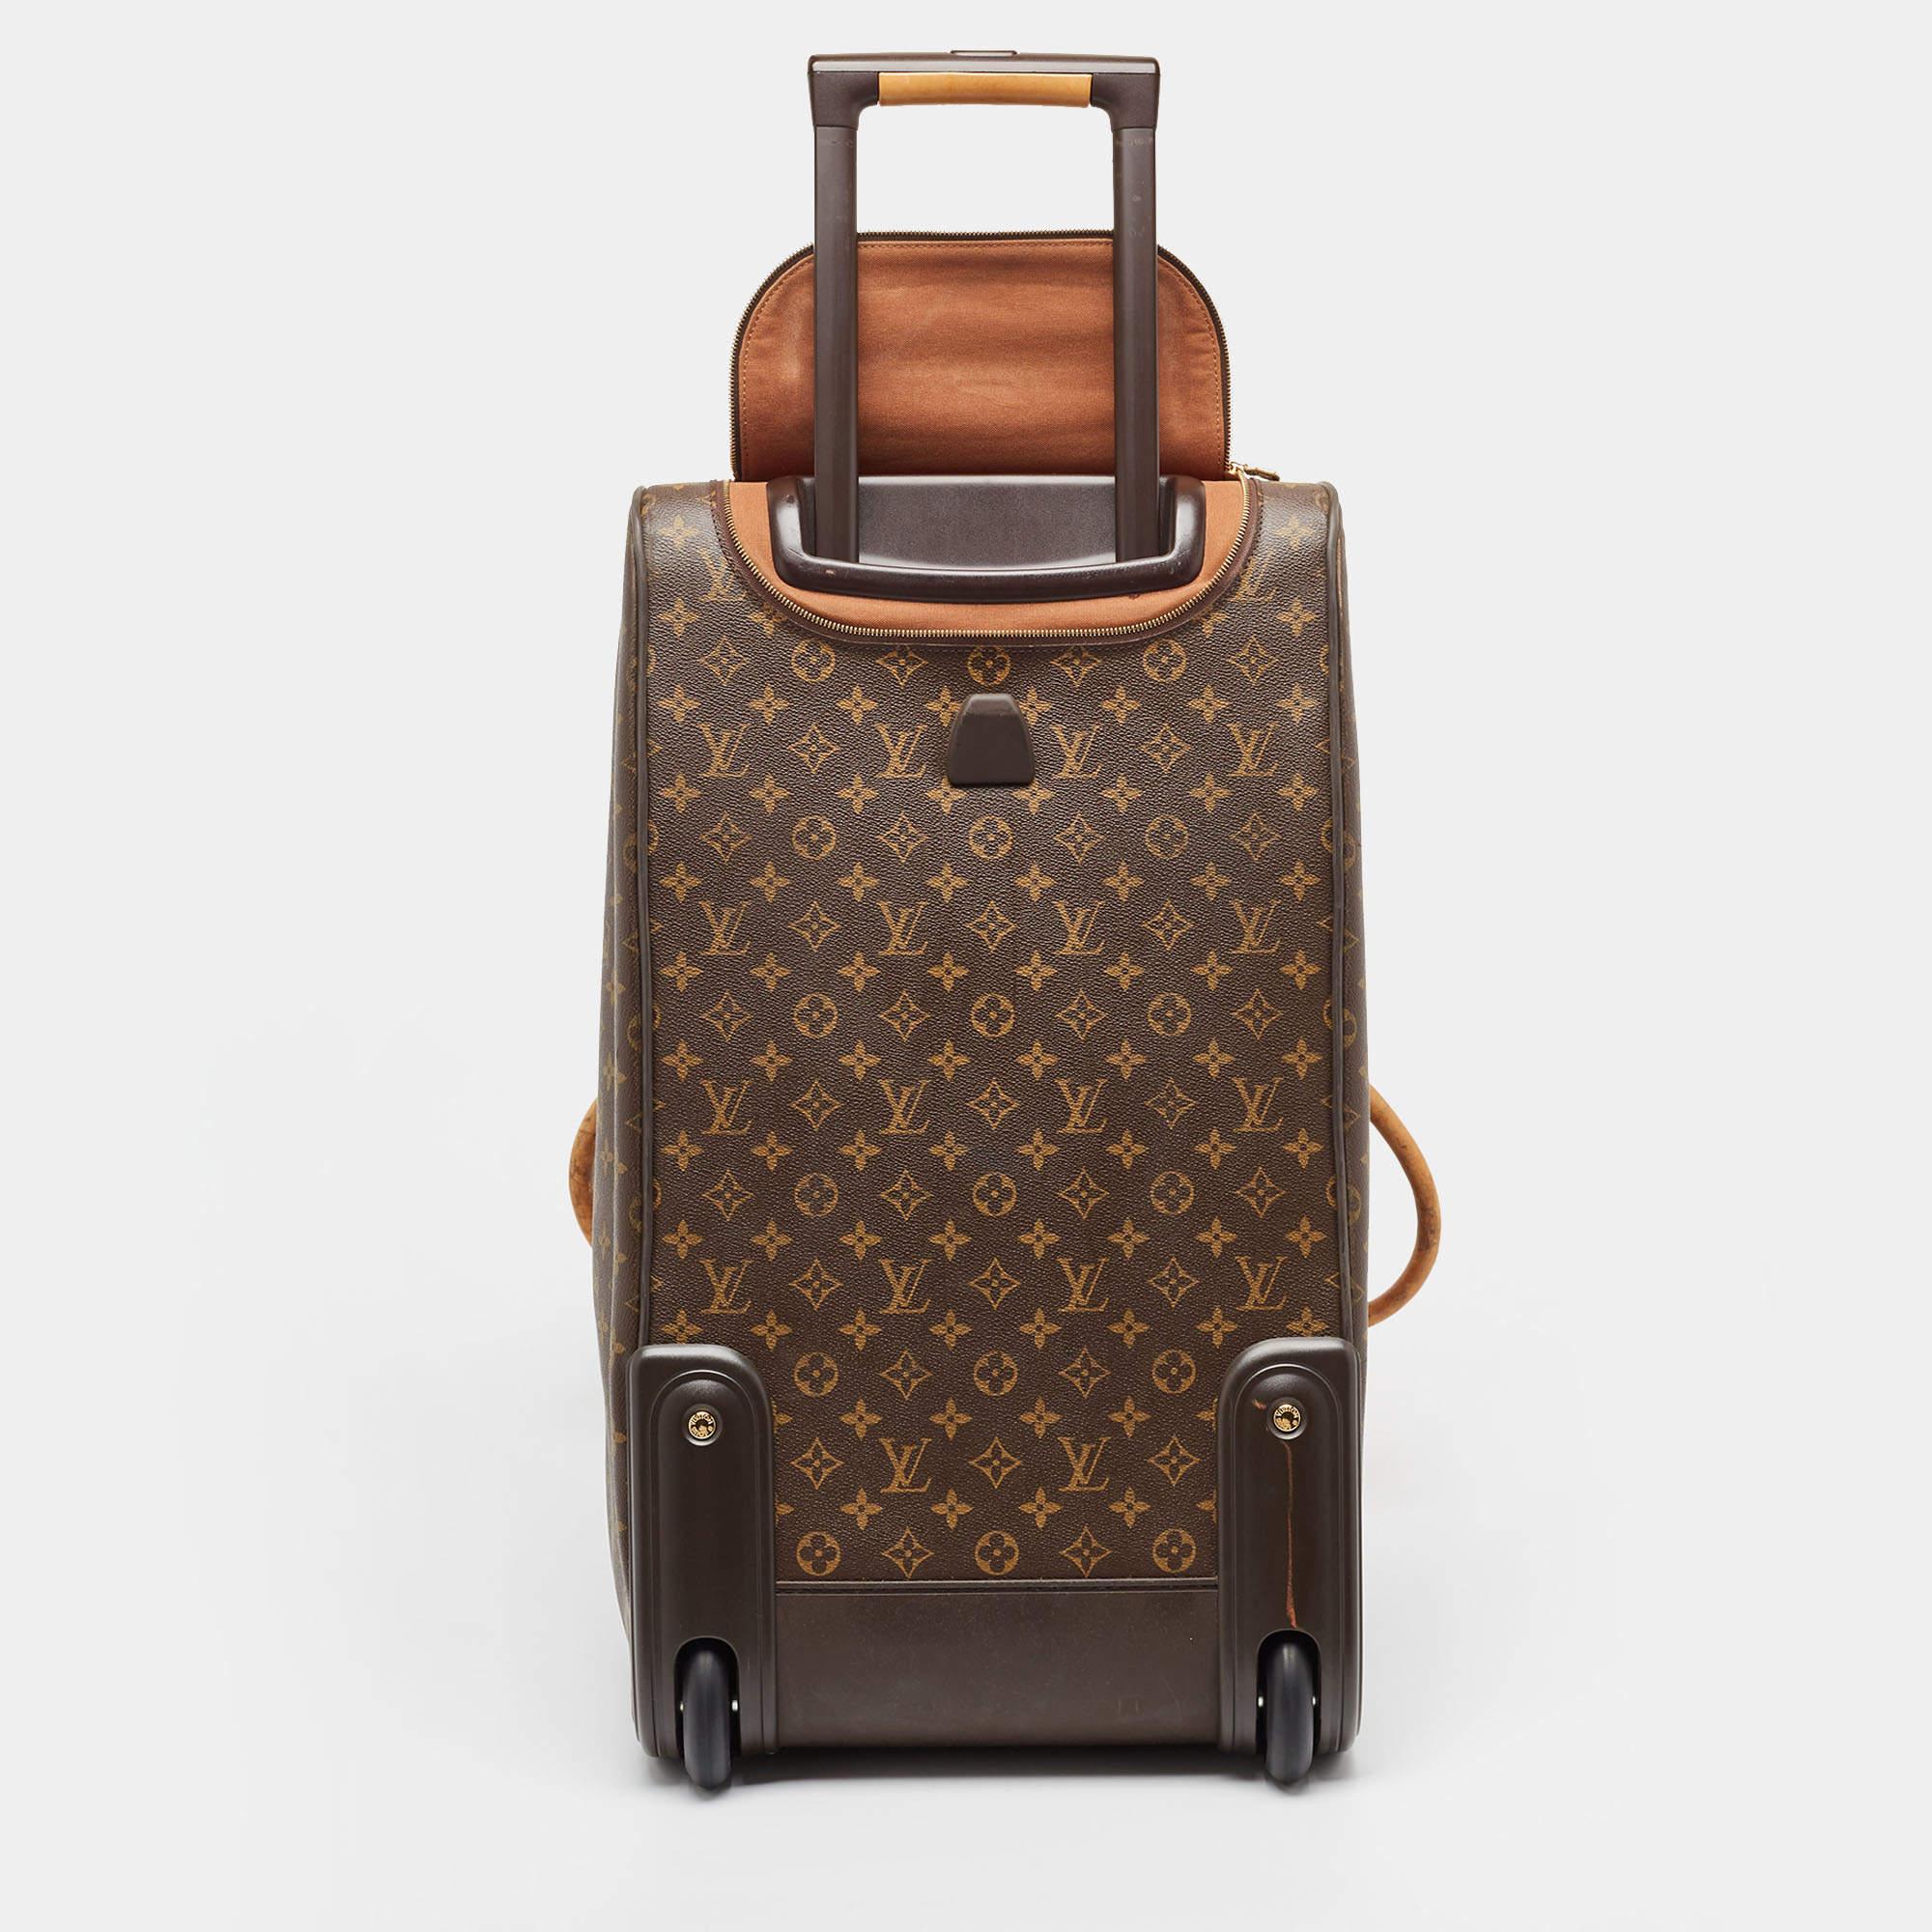 Featuring a chic yet luxurious style, this Louis Vuitton Eole 60 luggage bag is distinctive. Crafted from signature Monogram canvas, the bag is equipped with handles and trolly wheels and is secured by a zip closure. It offers a roomy interior to